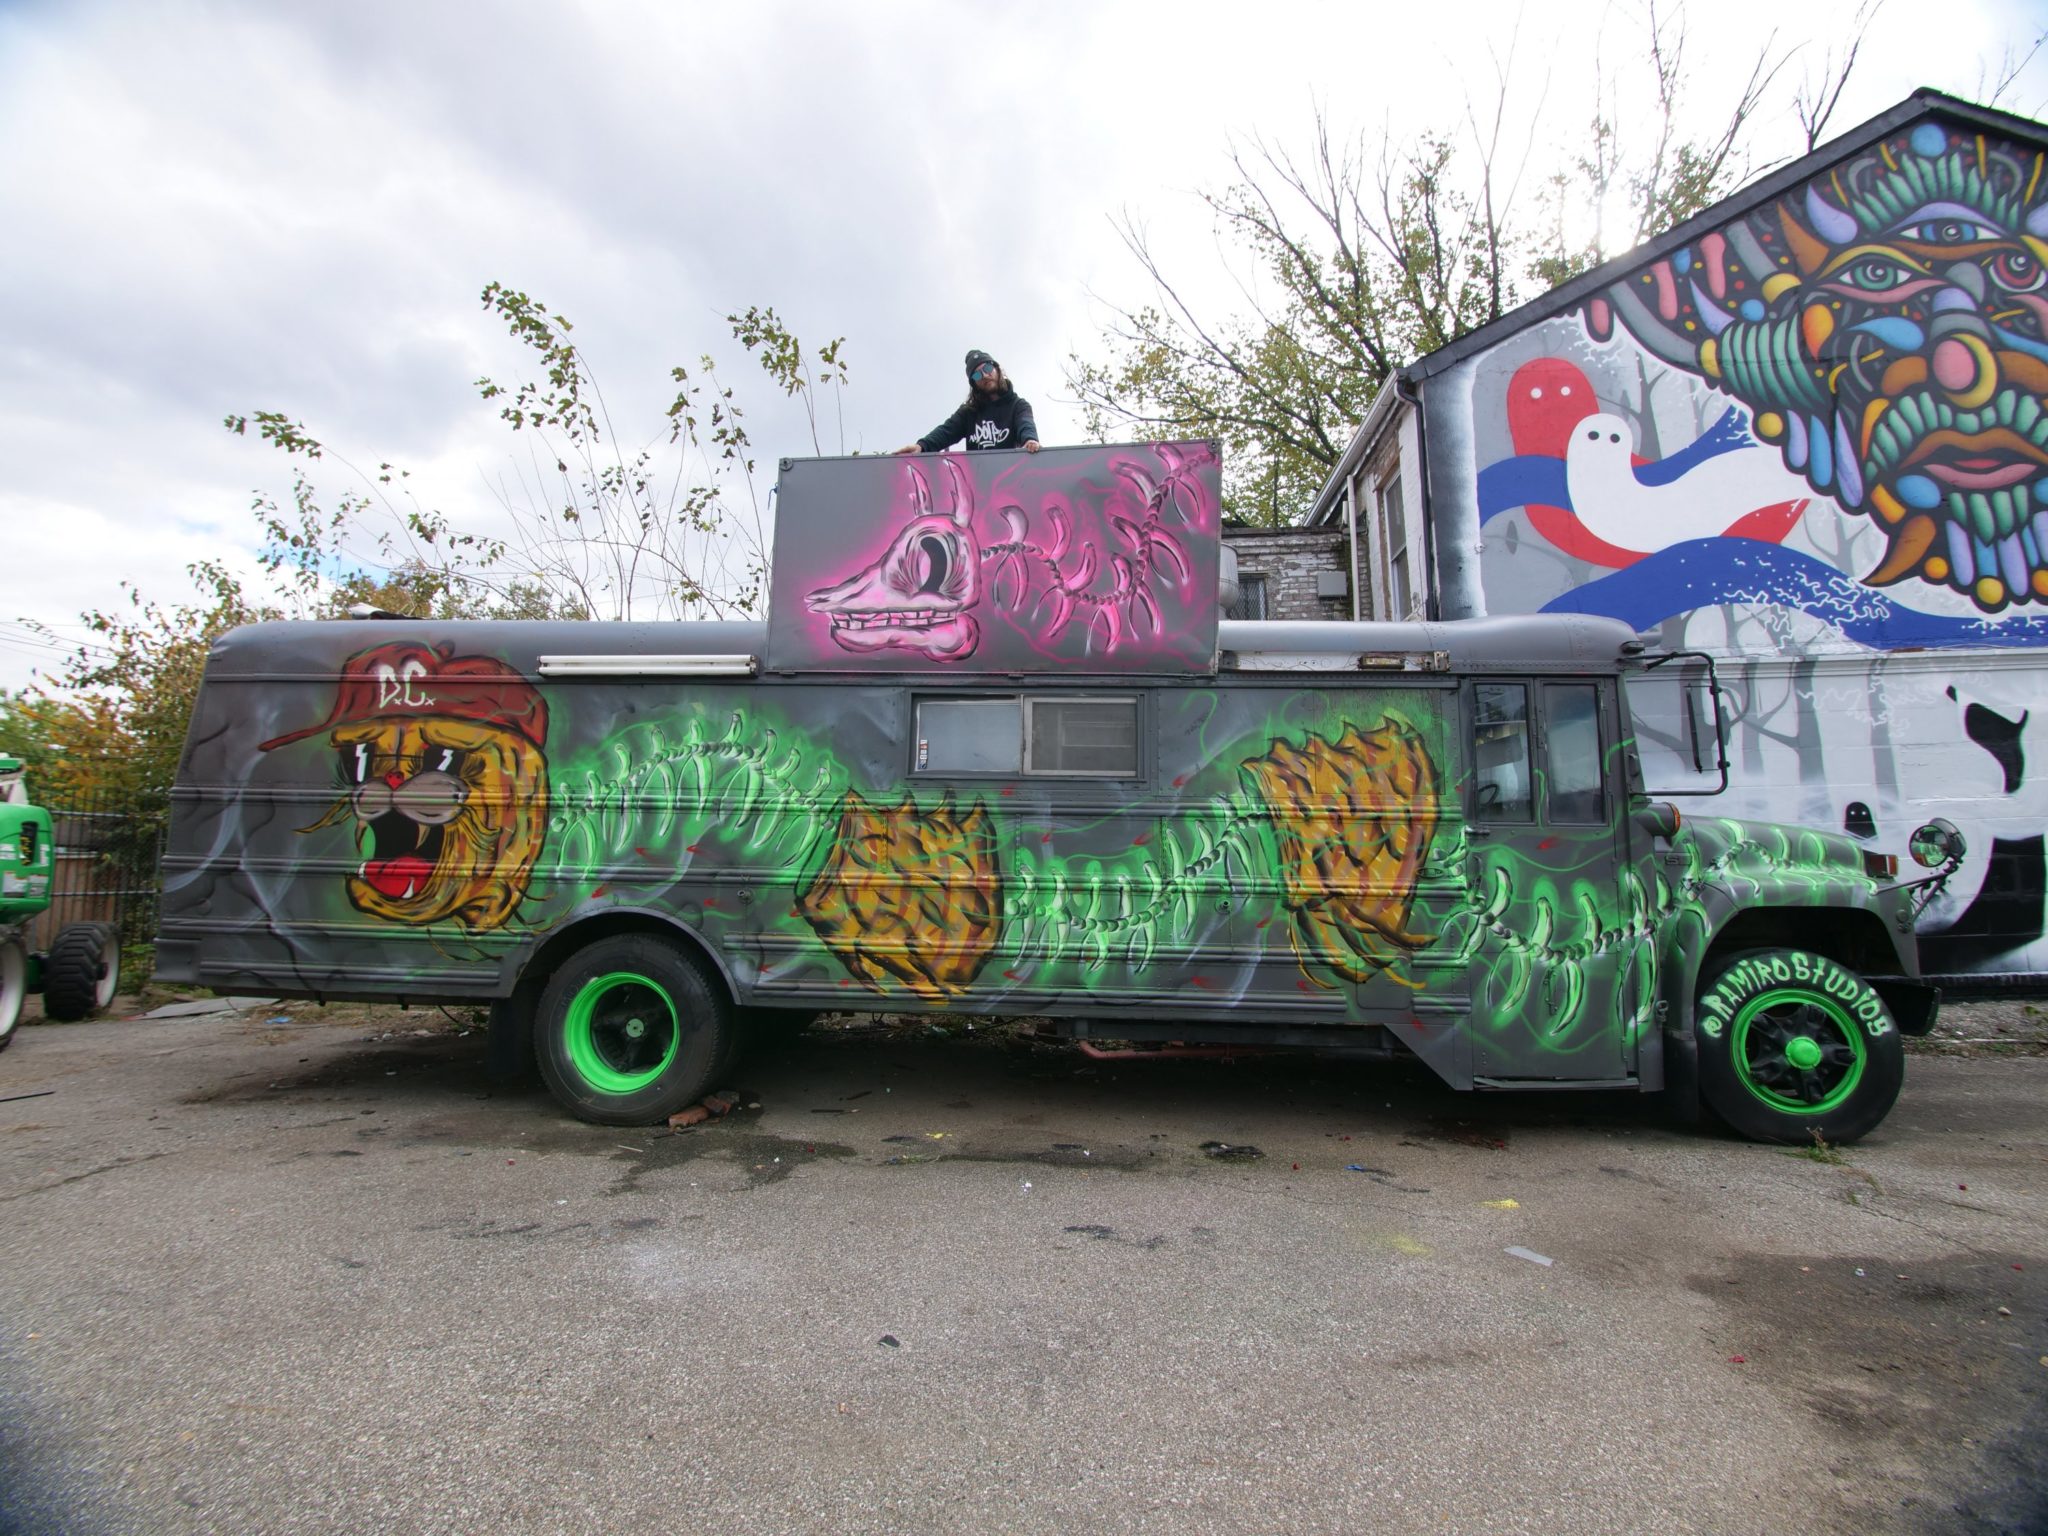 The painted bus that inspired the name, Electric Kool-Aid. Photograph by Lisa Bolden.